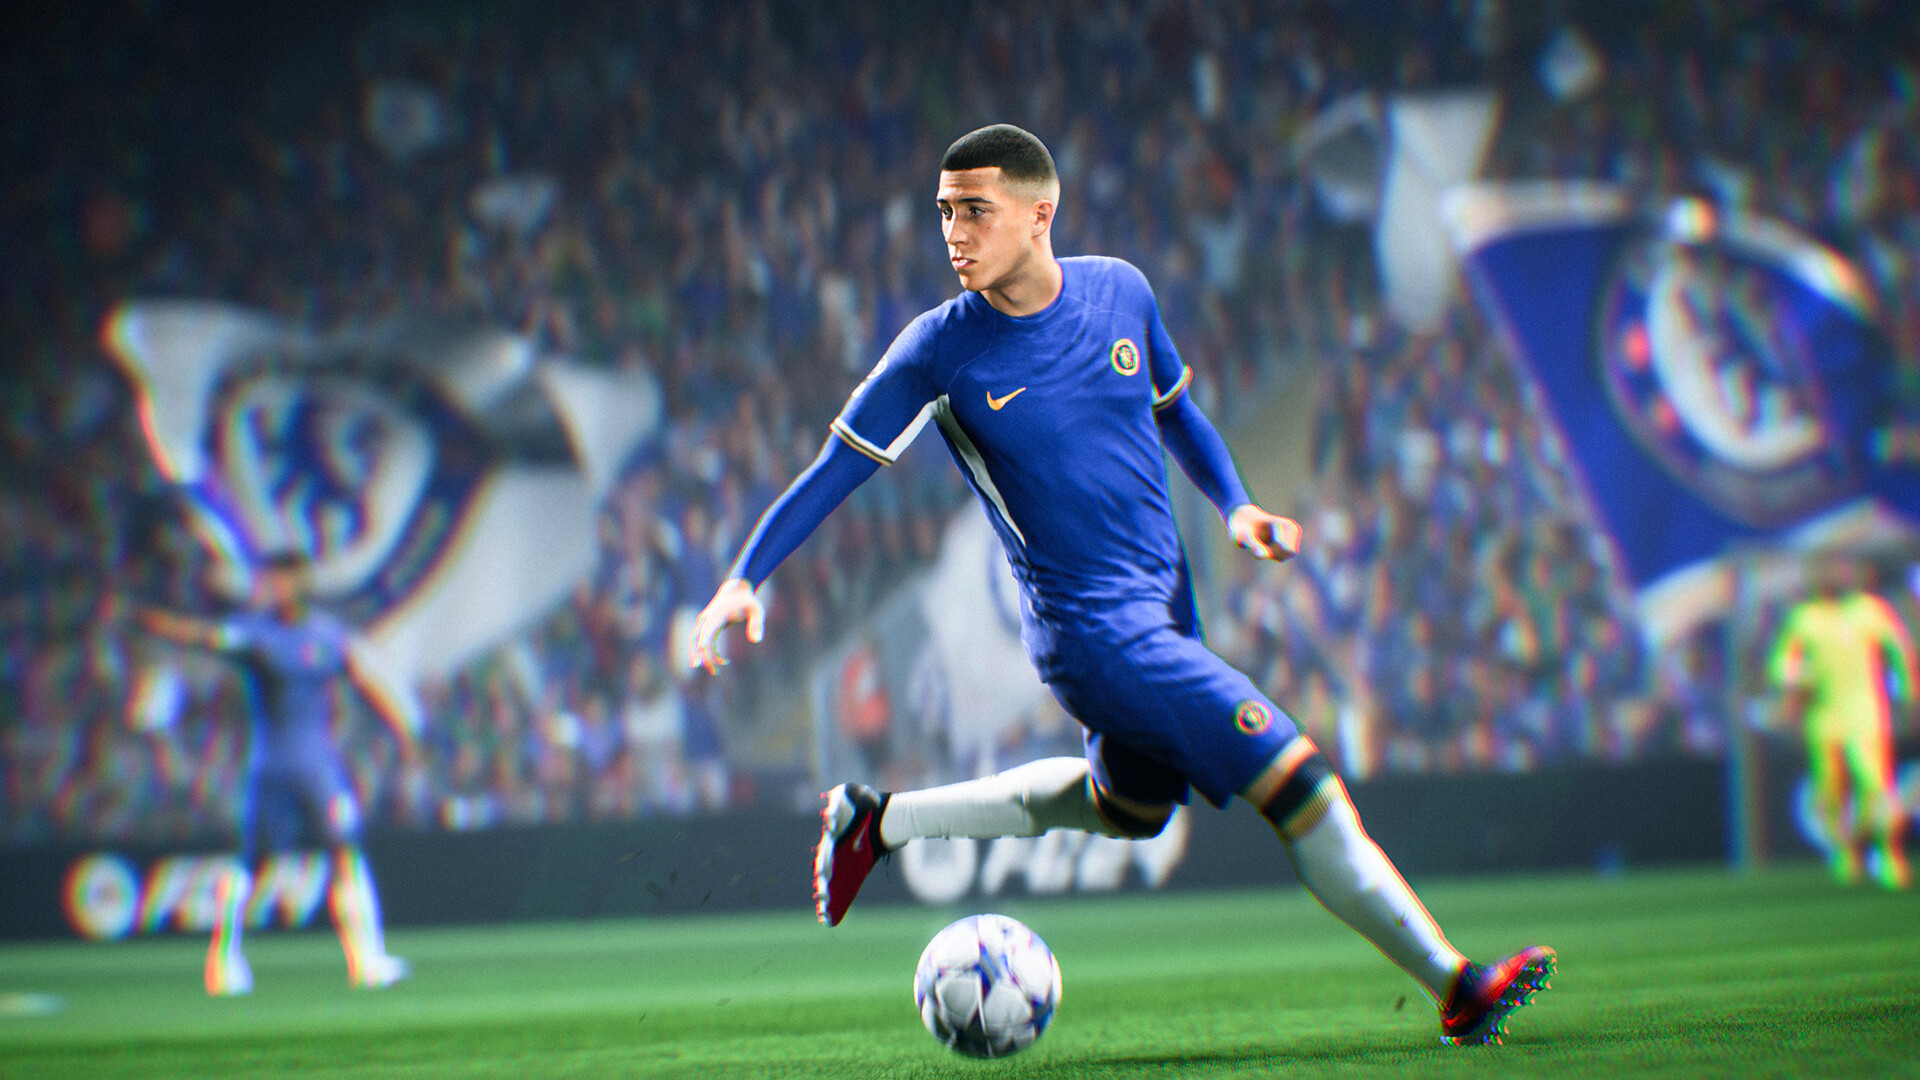 EA Sports FC 24 Trailer, Cover Athlete, Release Date, EA Play Trial, More